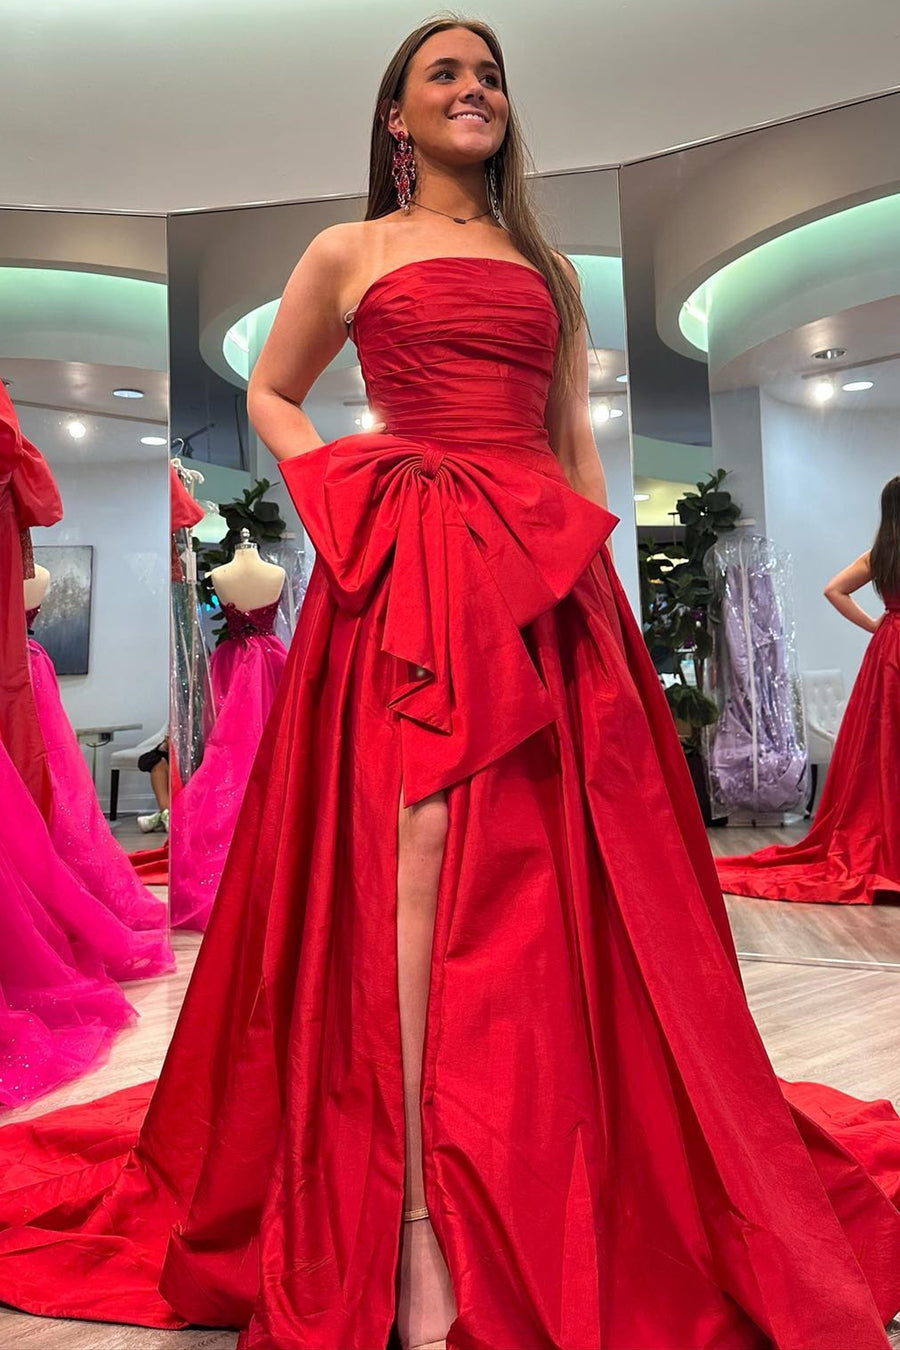 Neon Pink Strapless A-Line Prom Dress with Bow